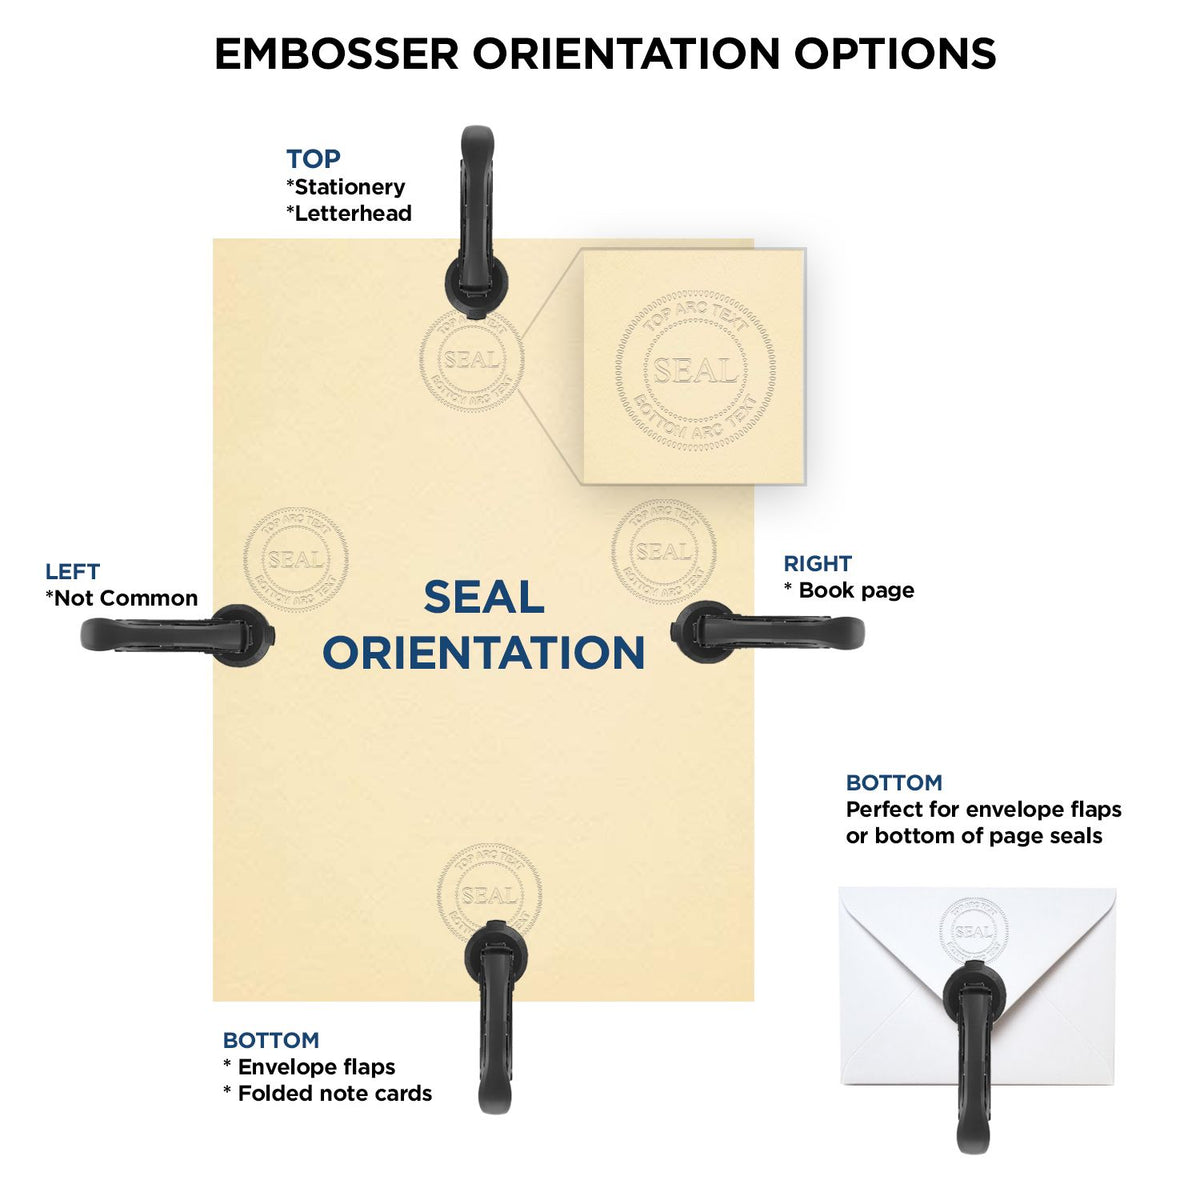 An infographic for the Soft Pocket Arizona Landscape Architect Embosser showing embosser orientation, this is showing examples of a top, bottom, right and left insert.